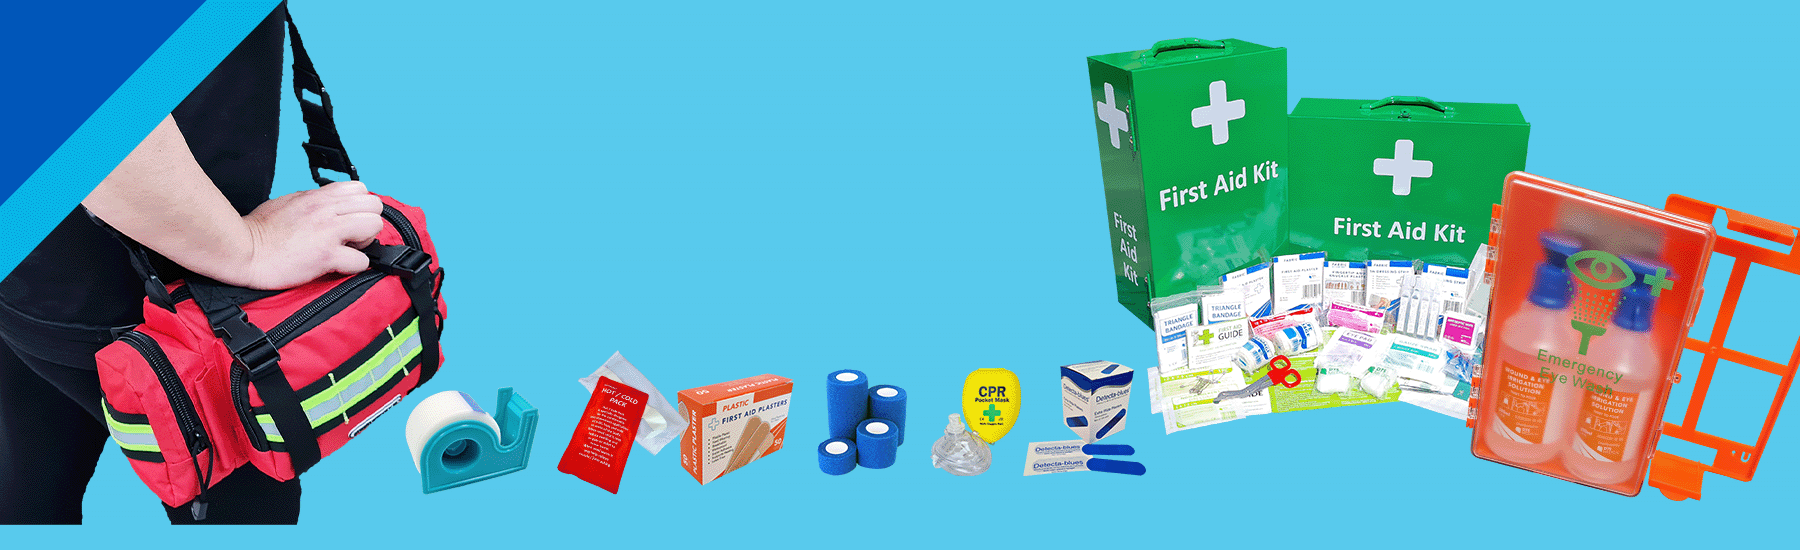 <h3>Dovetail Solutions</h3>                                     <h2>Numerous First Aid Solutions</h2>                                     <p>Ample choice to satisfy your customers' needs</p><button>Explore Now</button>